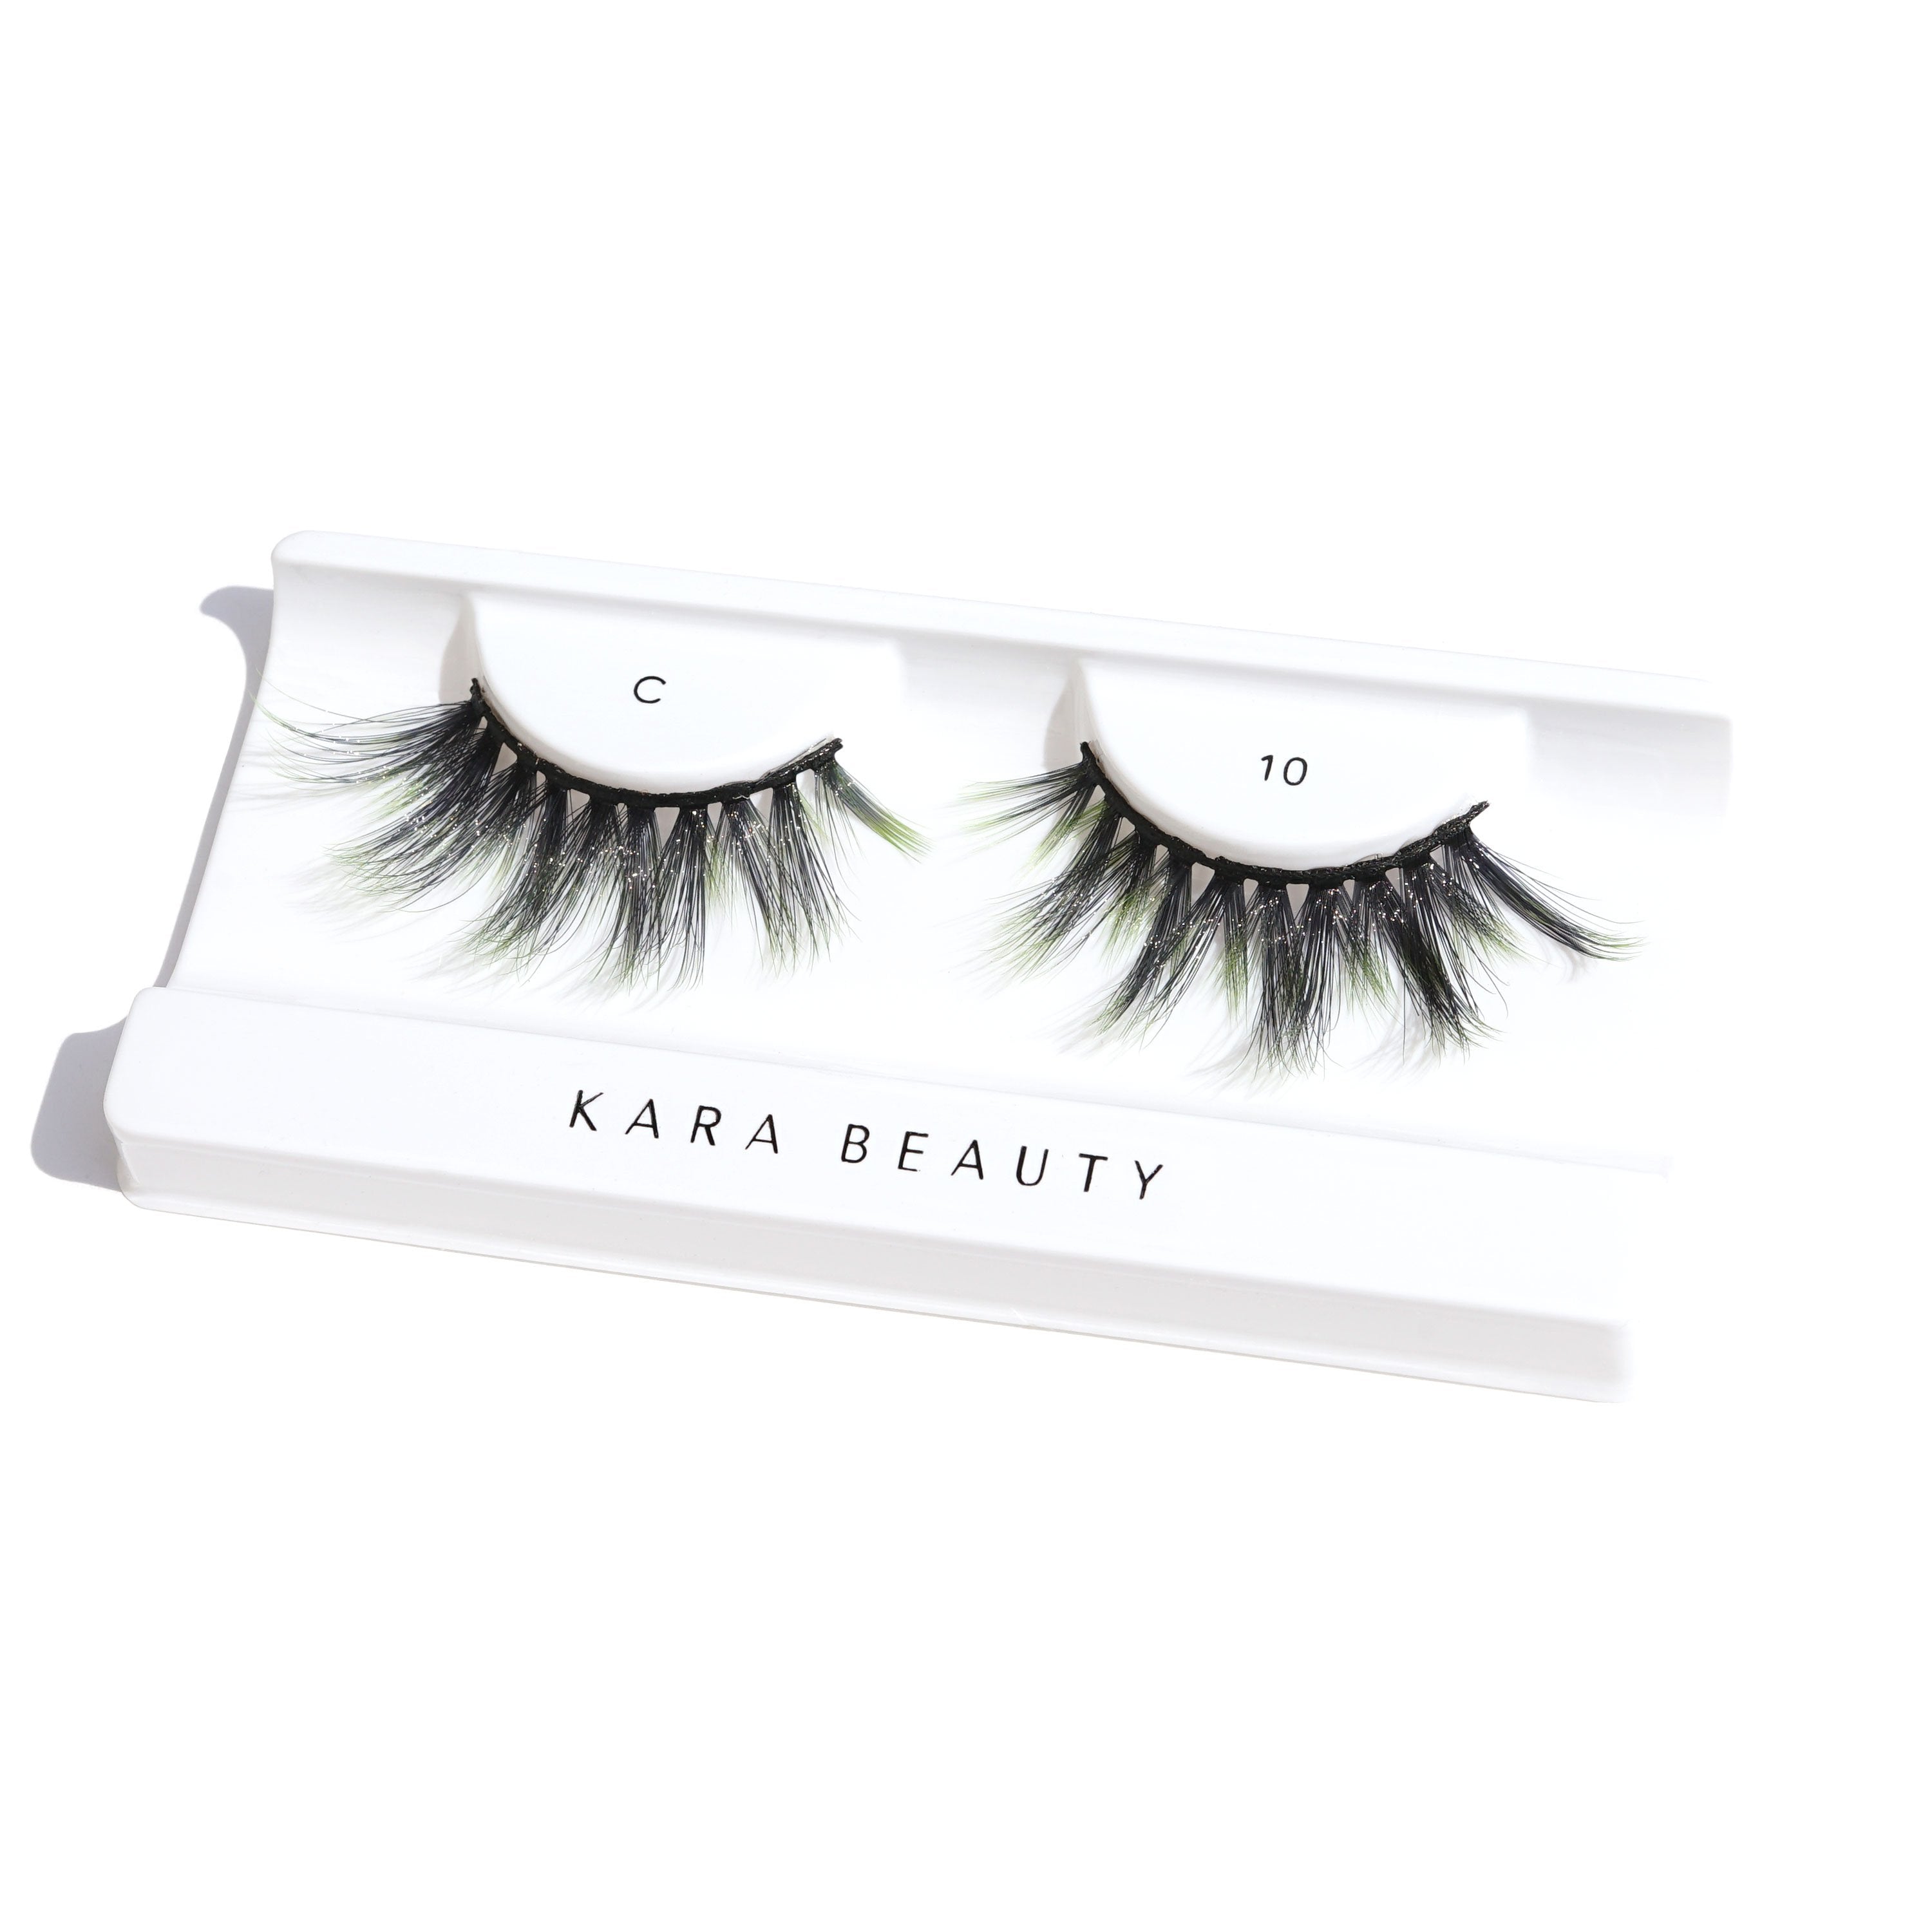 Green ombre 3D faux mink eyelashes